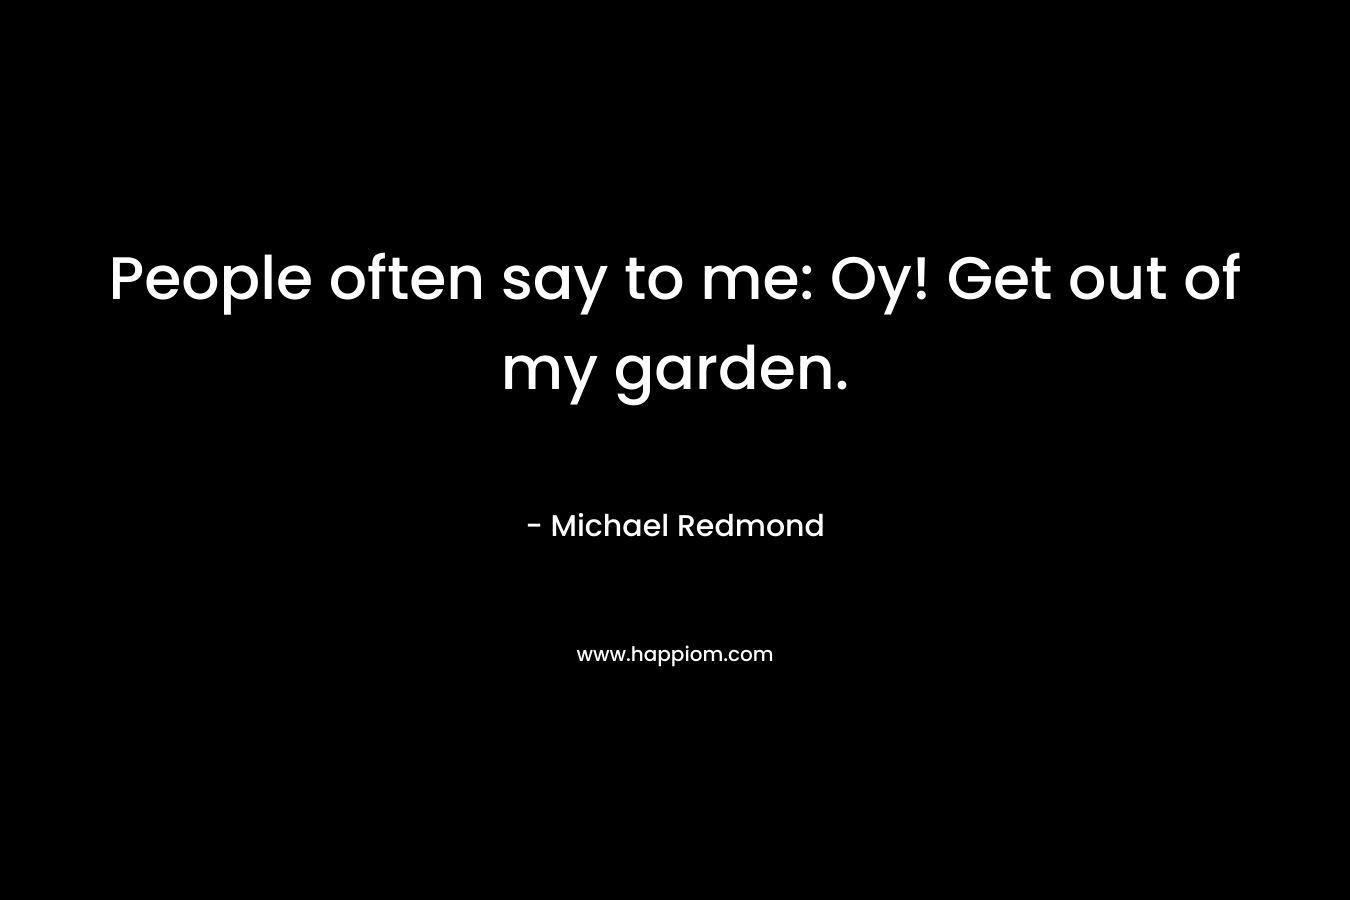 People often say to me: Oy! Get out of my garden.